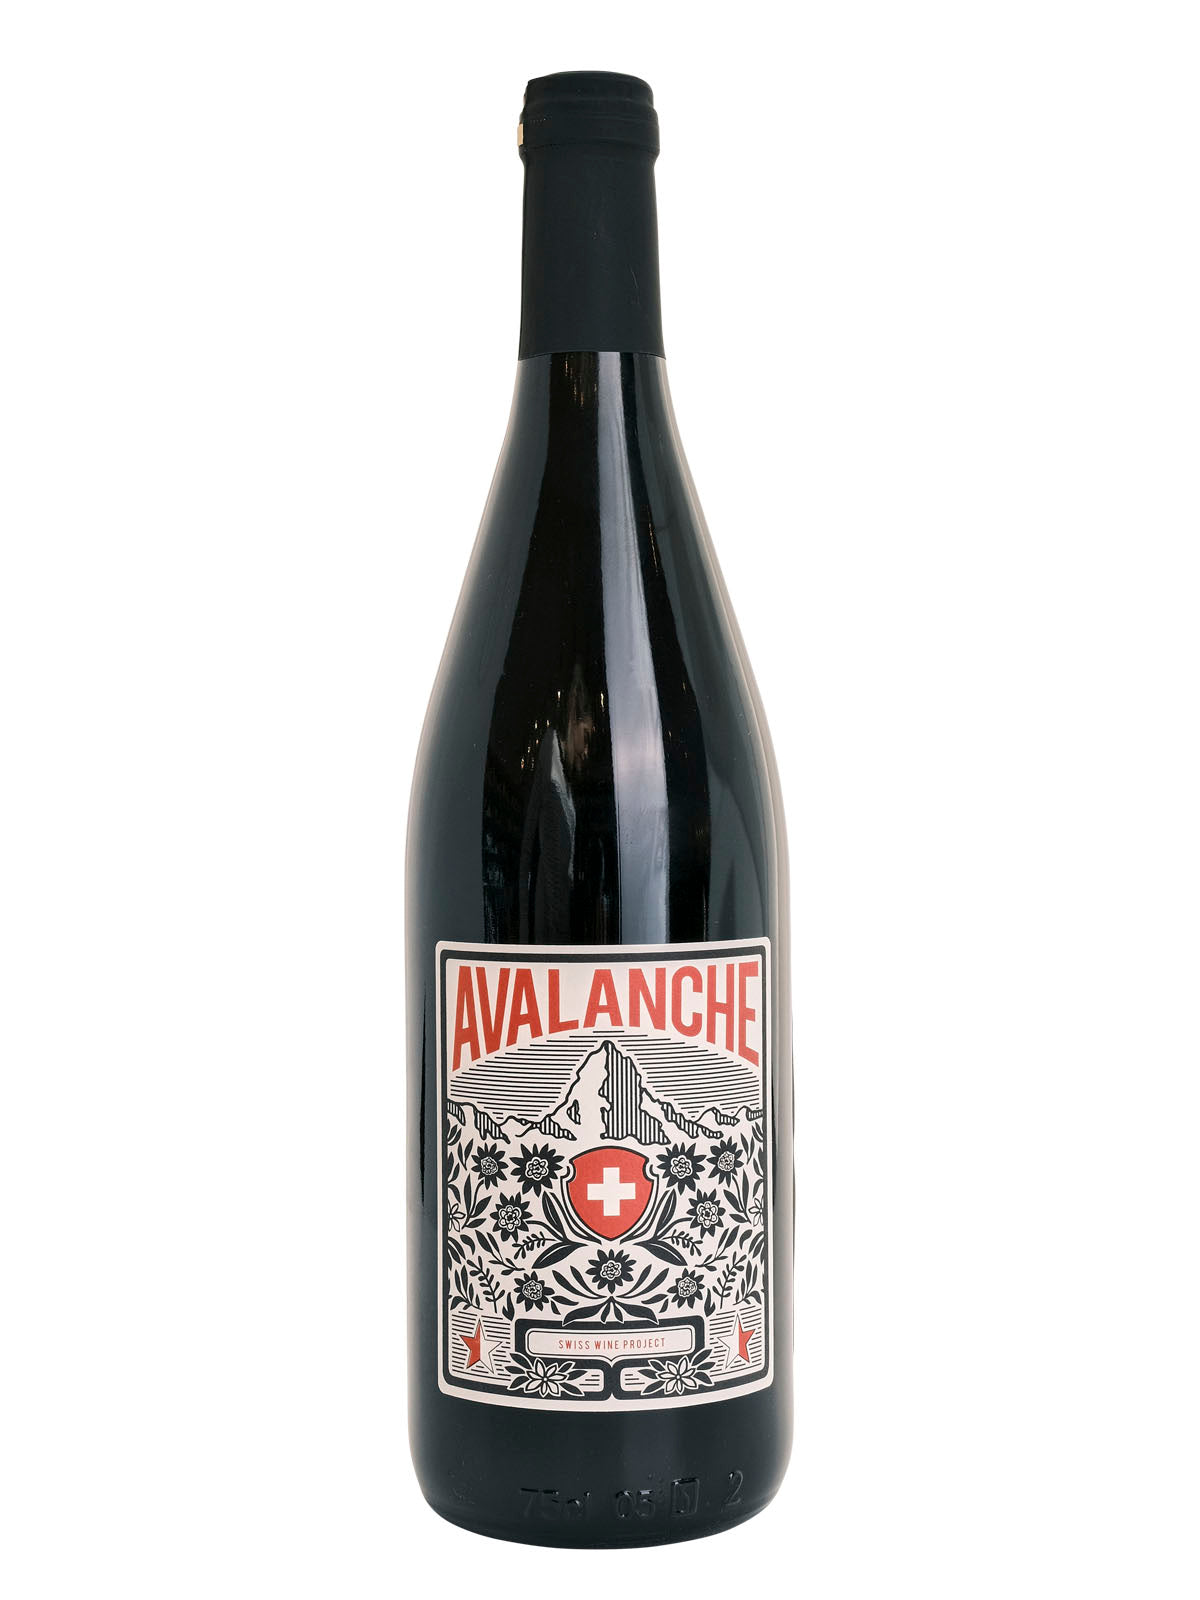 *2R* 2020 Avalanche by Olivier Roten Valais Pinot Noir (Valais, CH)